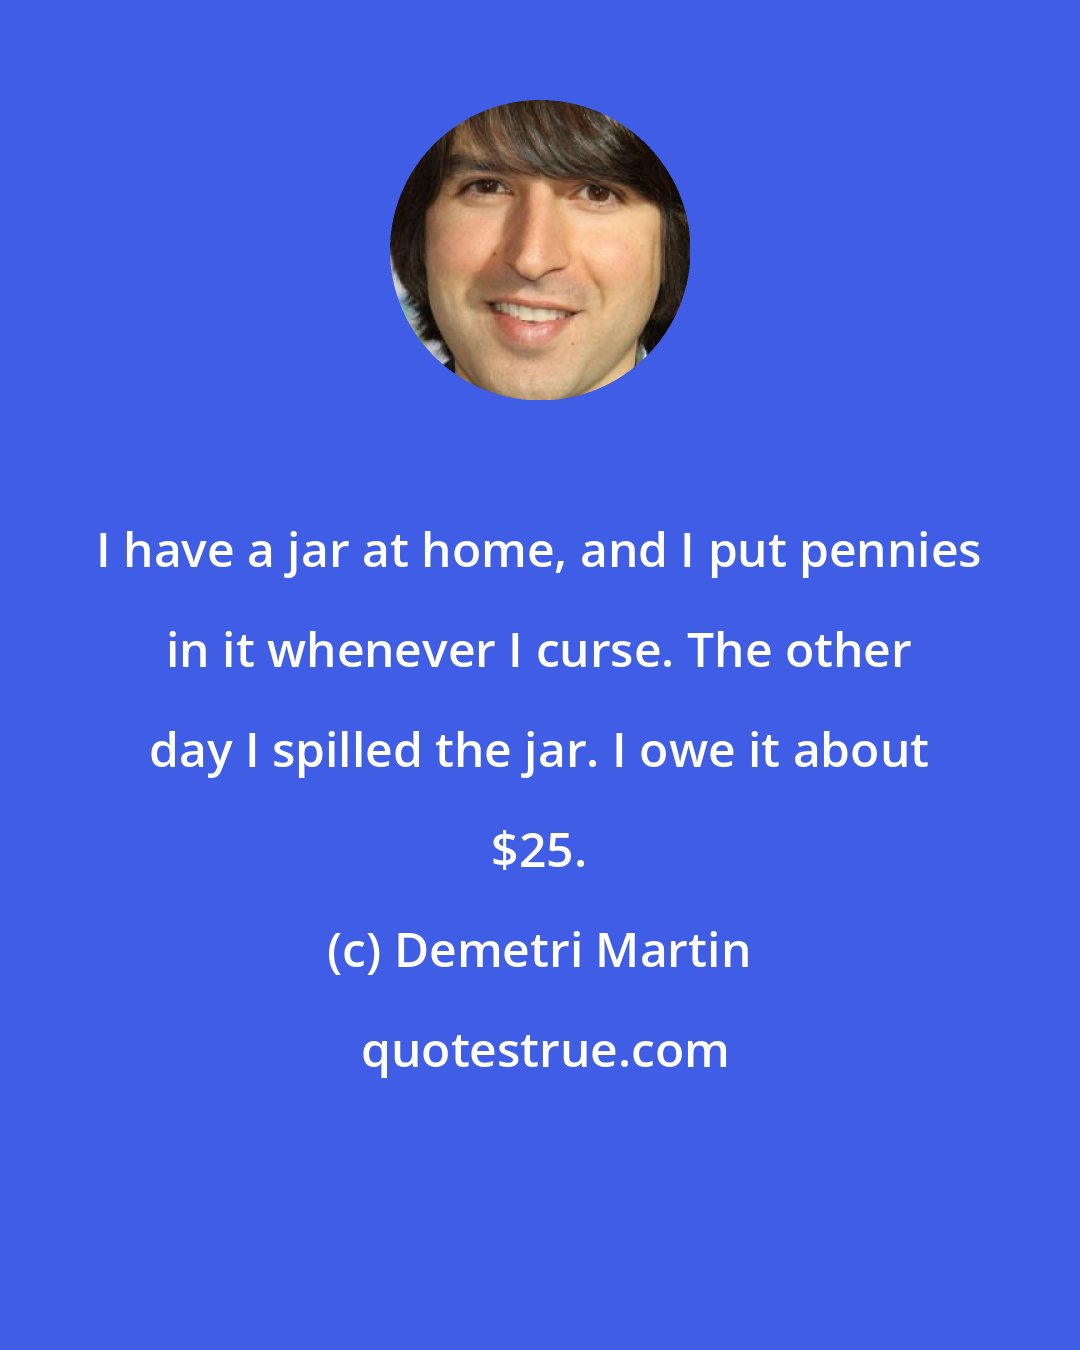 Demetri Martin: I have a jar at home, and I put pennies in it whenever I curse. The other day I spilled the jar. I owe it about $25.